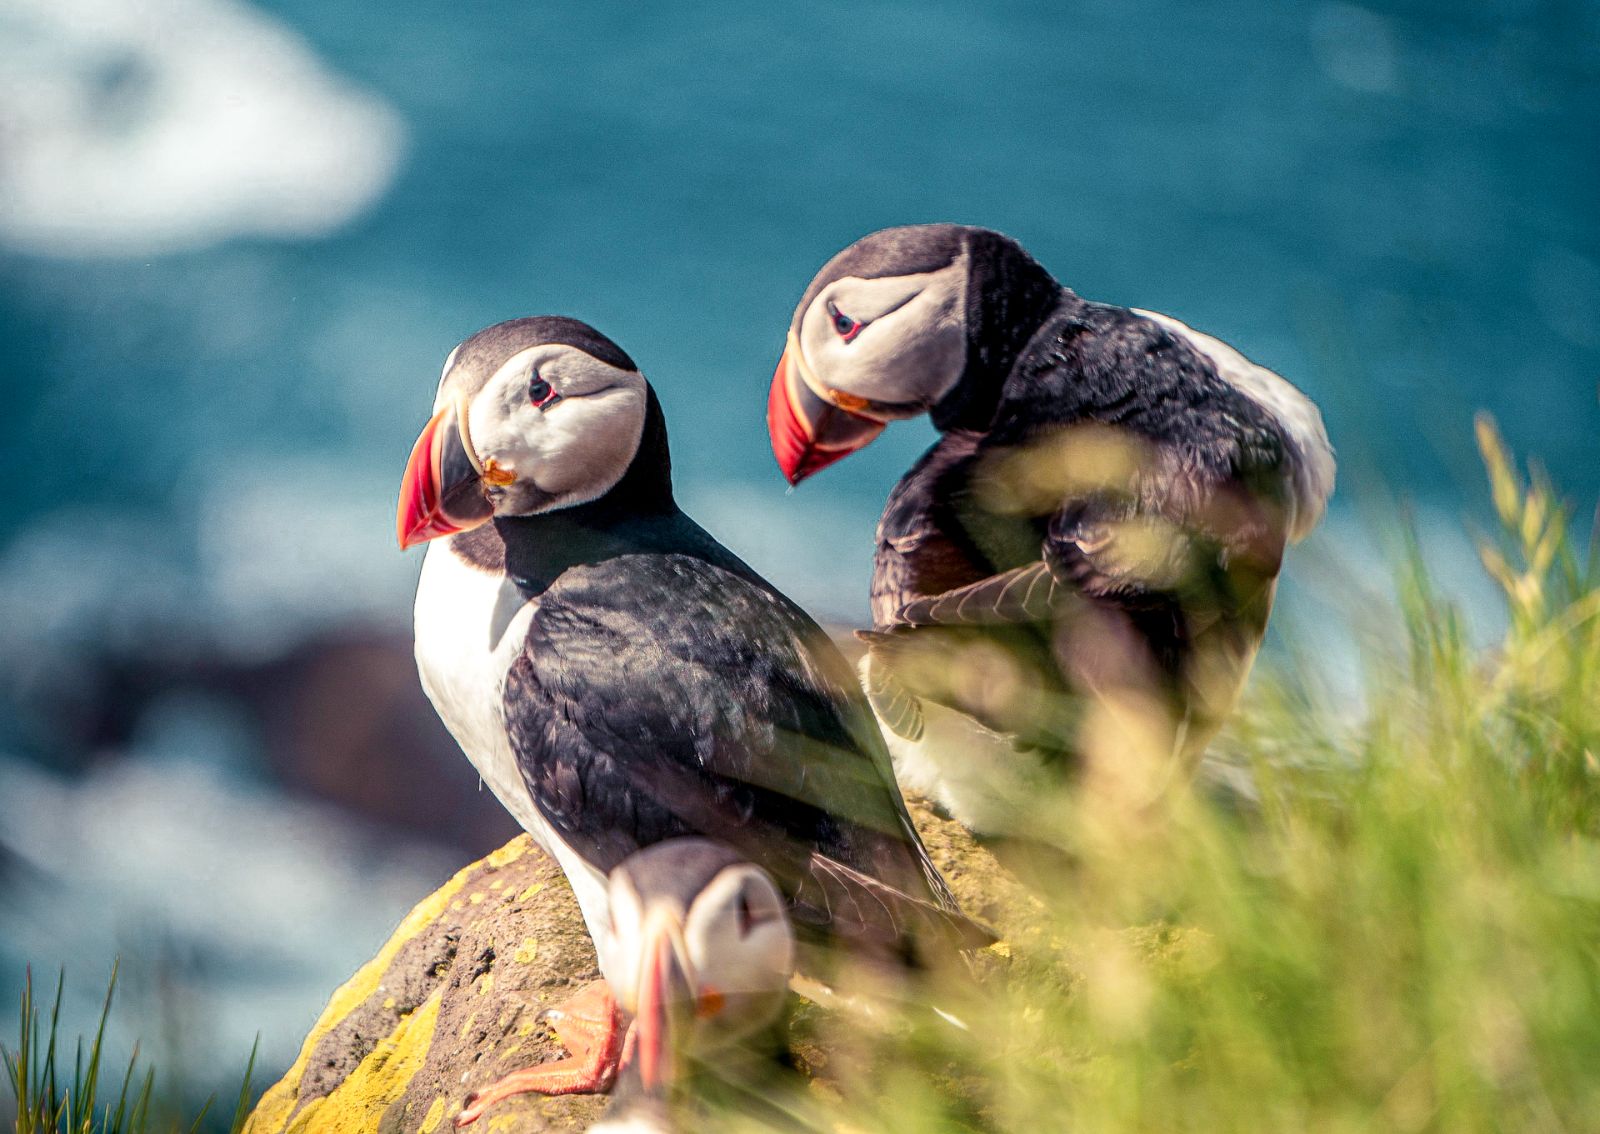 Puffins spotted in the Arctic from SIlversea's Silver Endeavour cruise ship